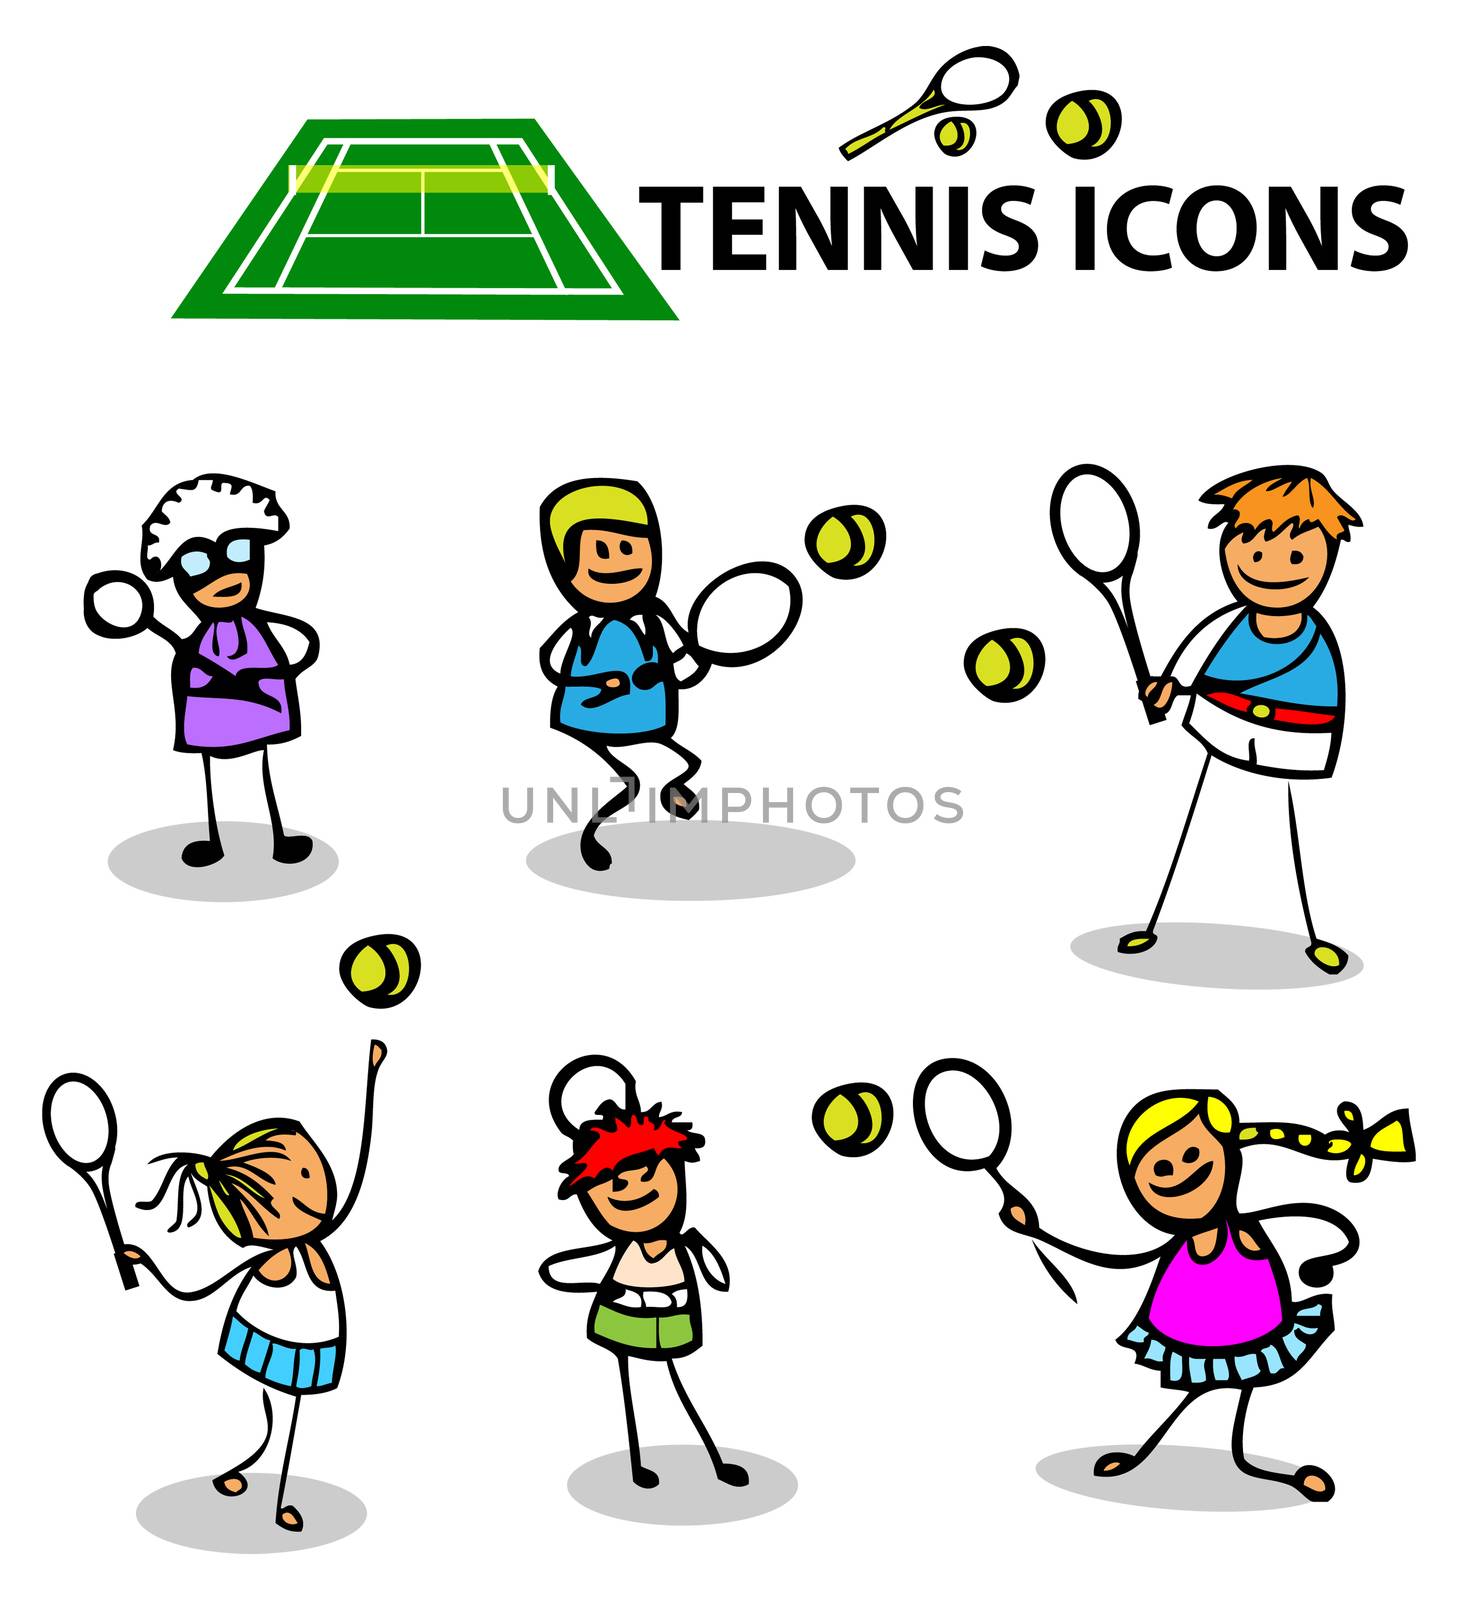 Tennis icons, fake cartoon sport emblems, vector illustration by IconsJewelry